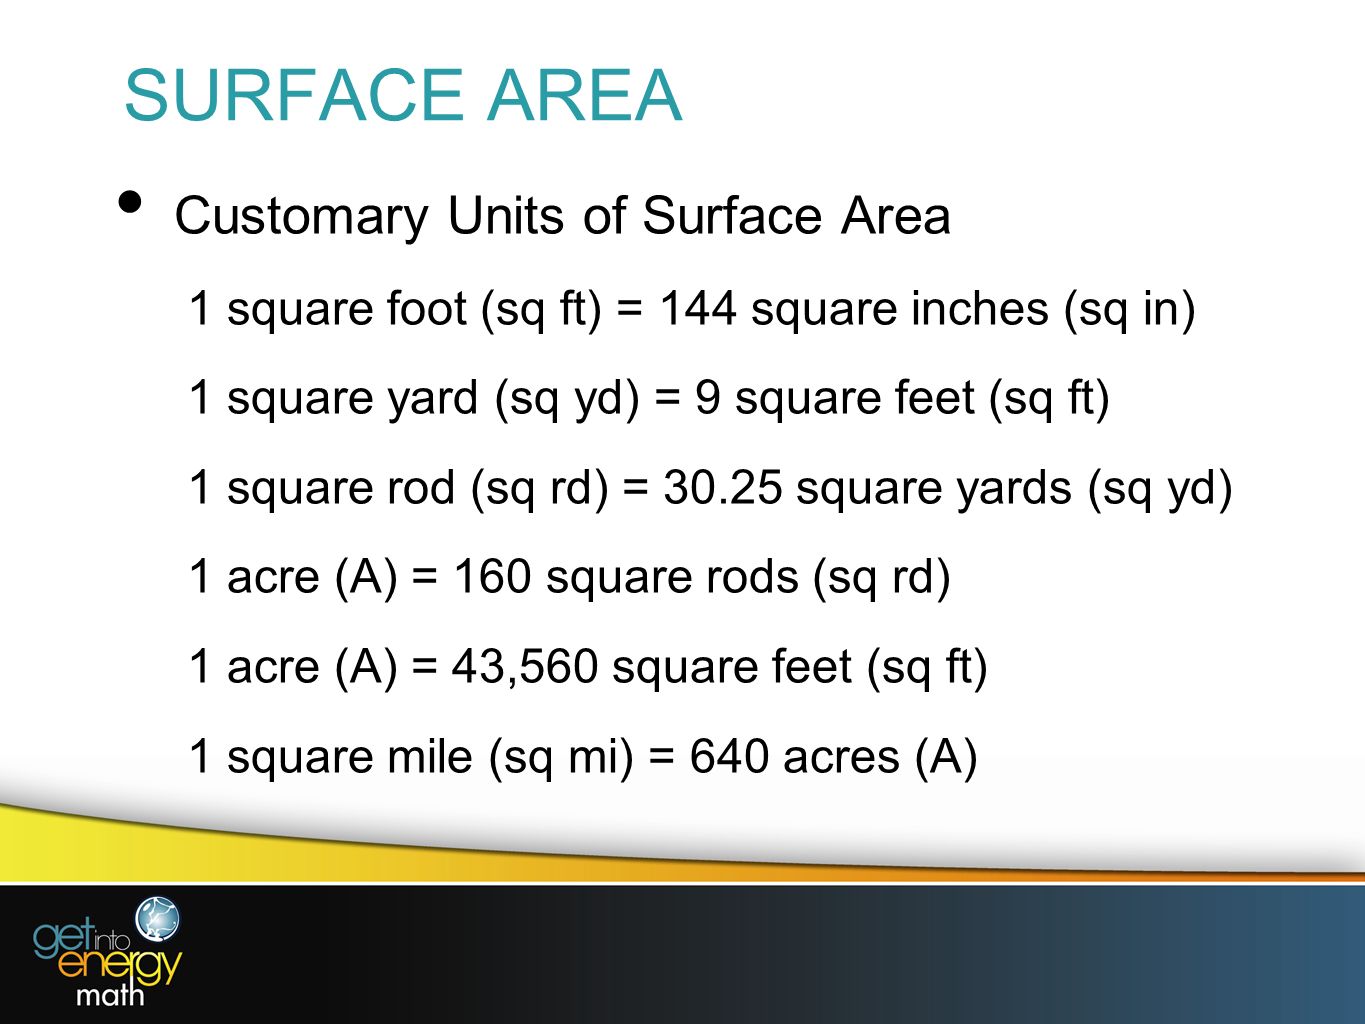 How do you measure 1 acre in feet?